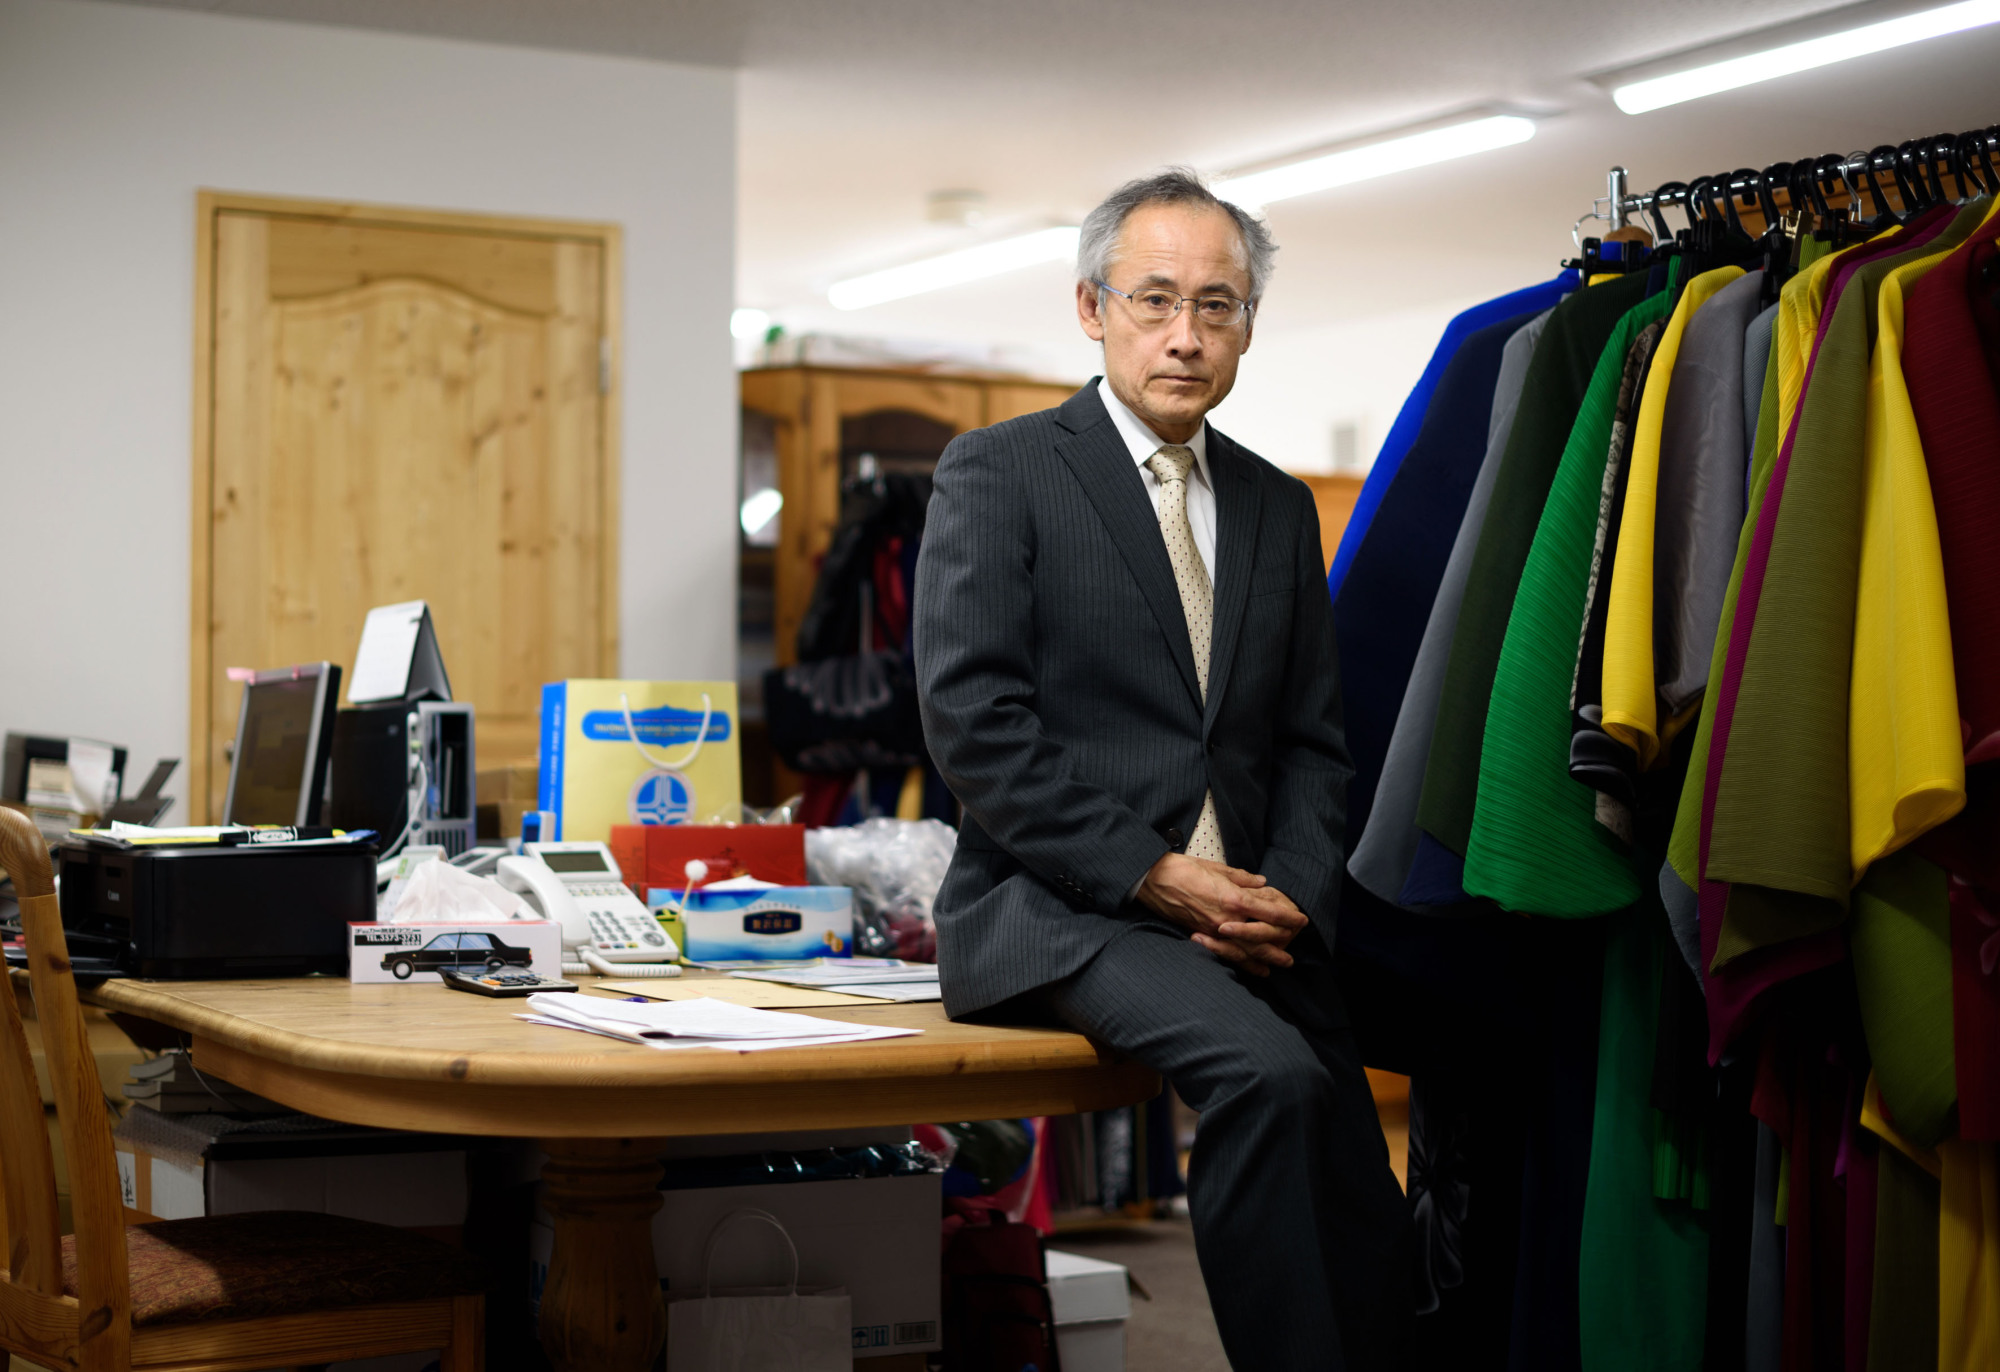 Beji Sasaki, chairman of Freesia Macross Co., says his bidding war with the &#36;13 billion computer giant Fujitsu Ltd. is just the start of his plan to use takeovers to change Japan's corporate landscape. | BLOOMBERG